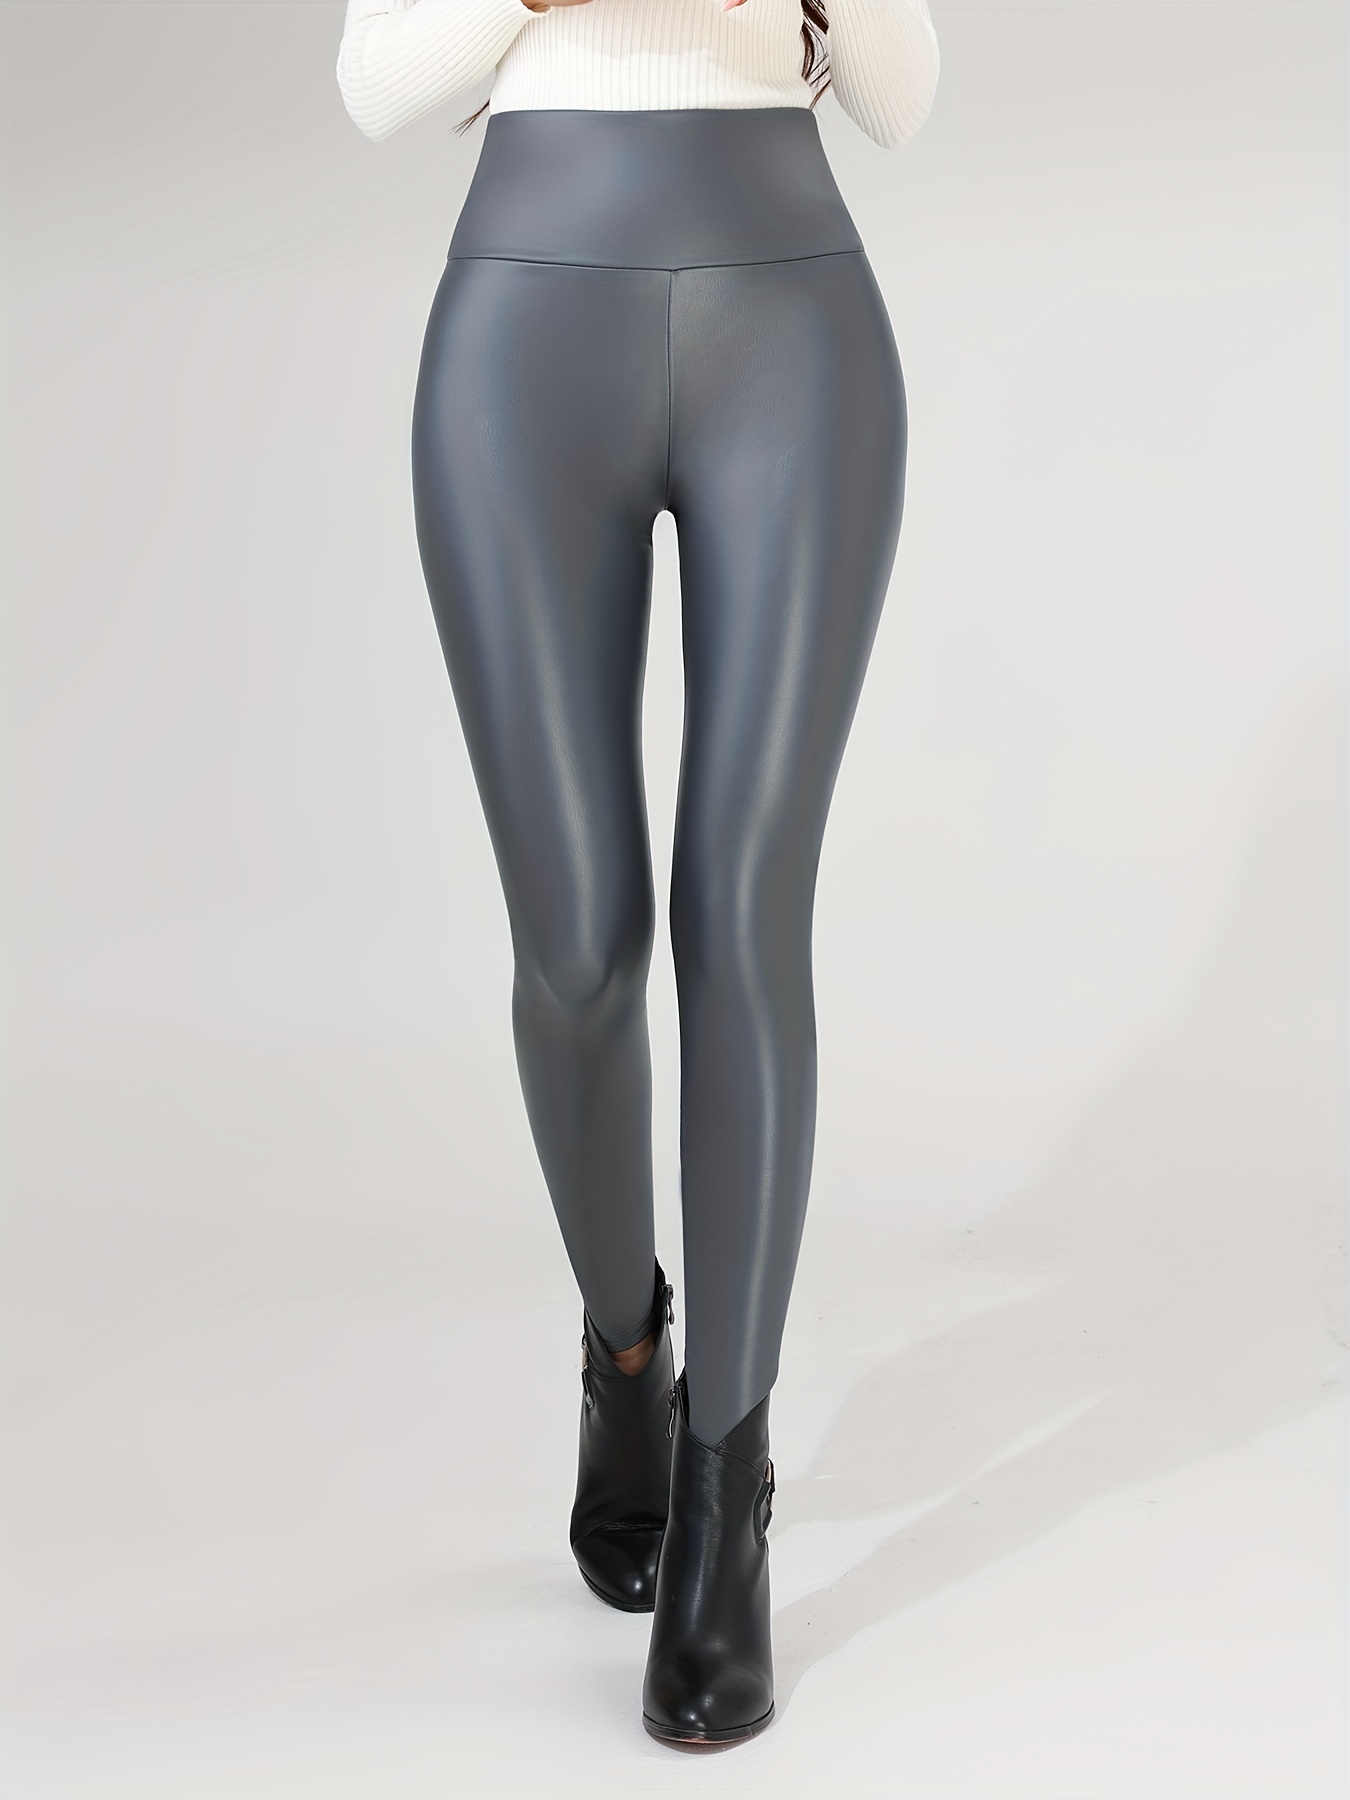 Faux Leather Leggings for Women High Waisted Stretch Winter Fleece